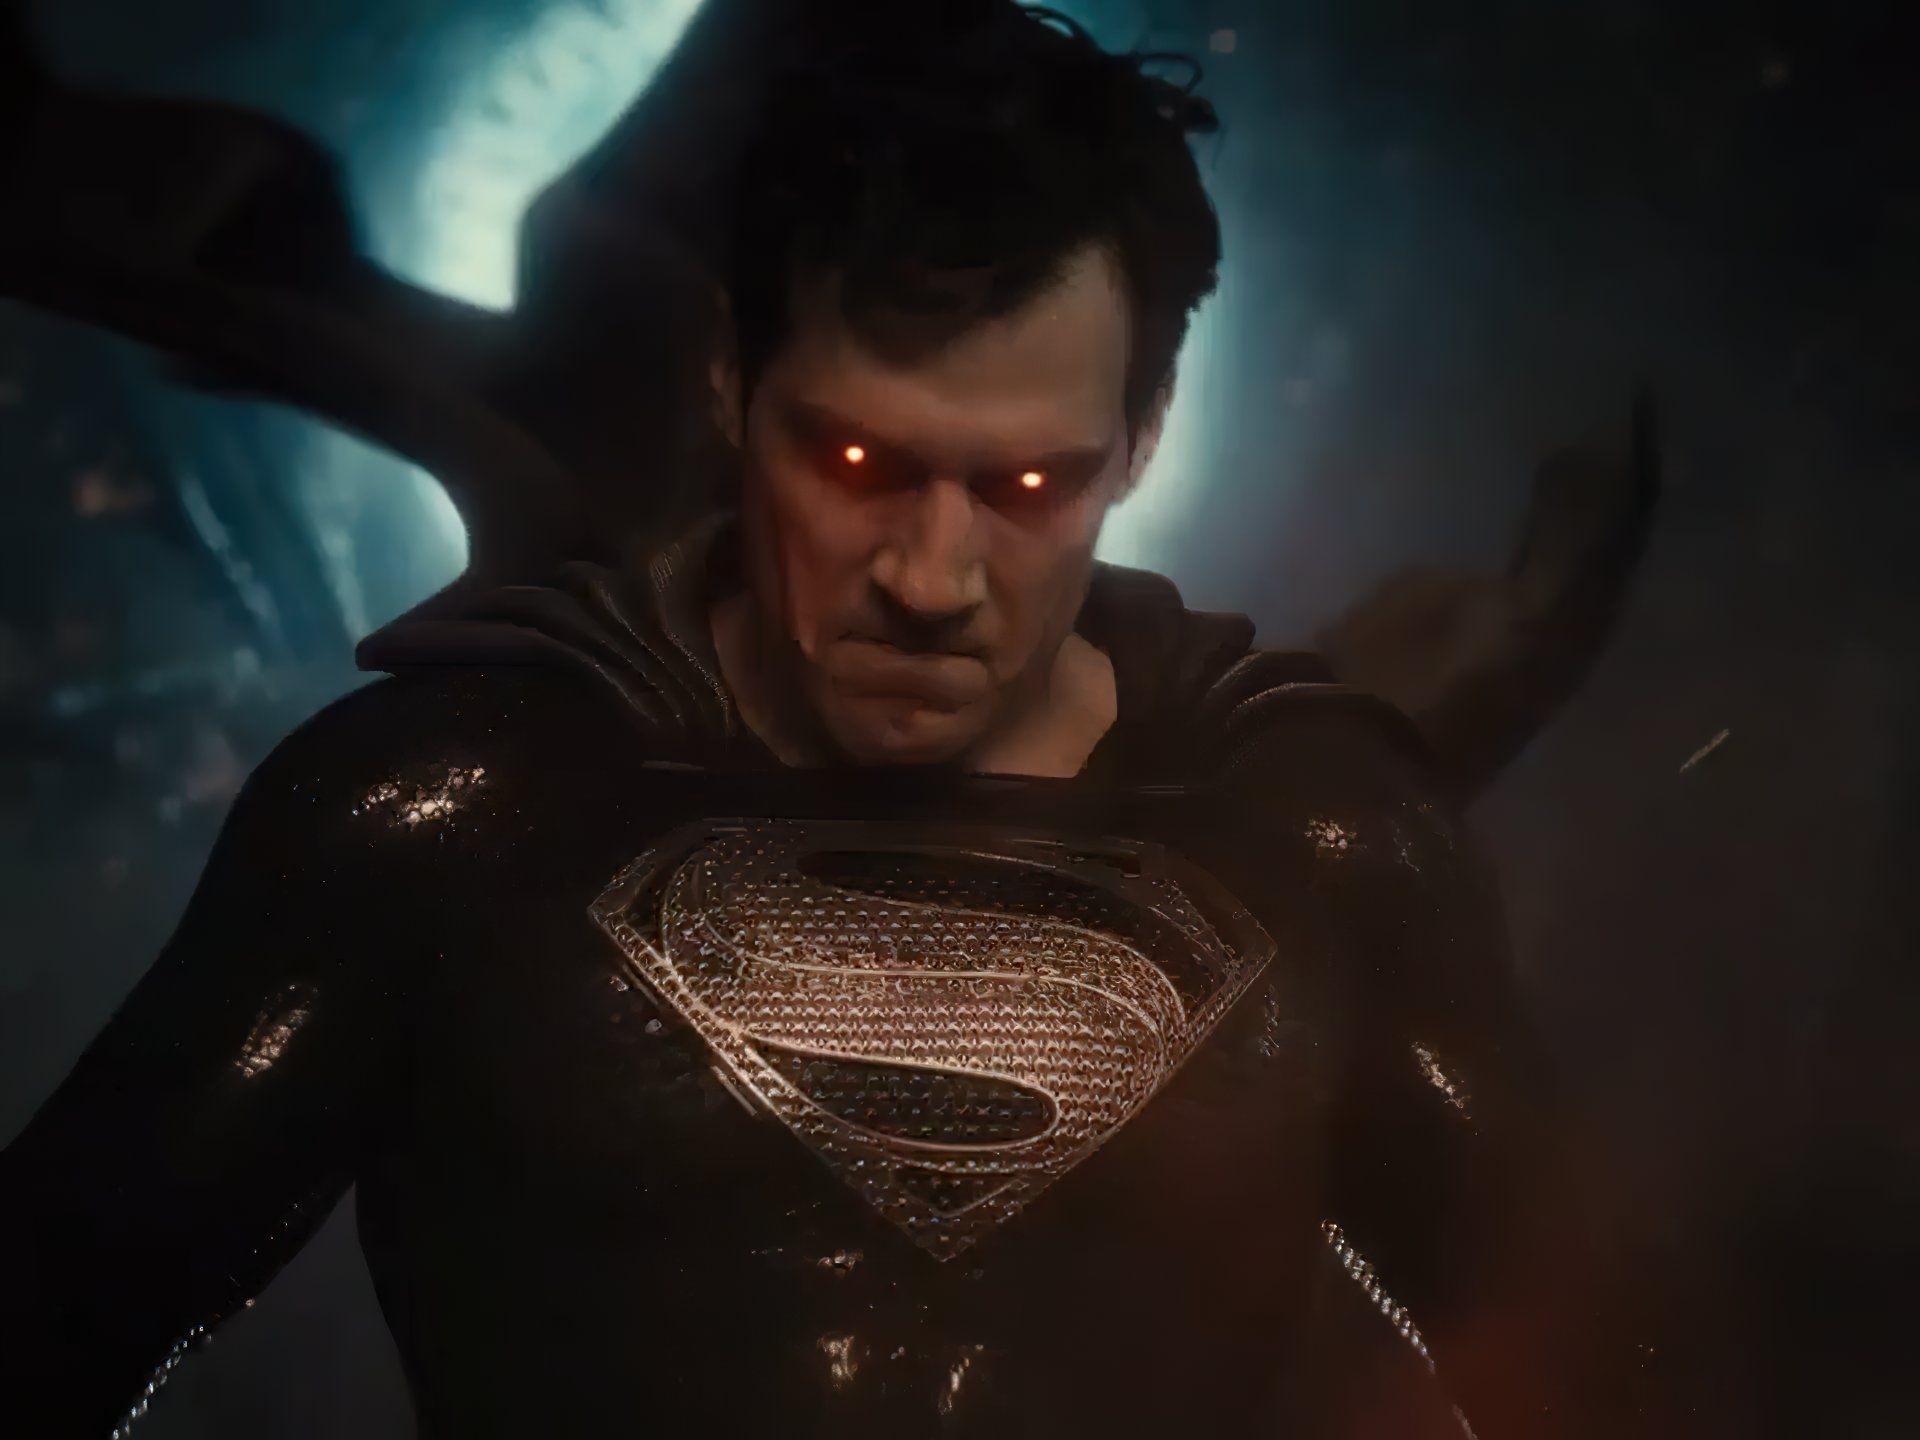 Justice League: Check Out Superman's Black Suit Before New Snyder Cut